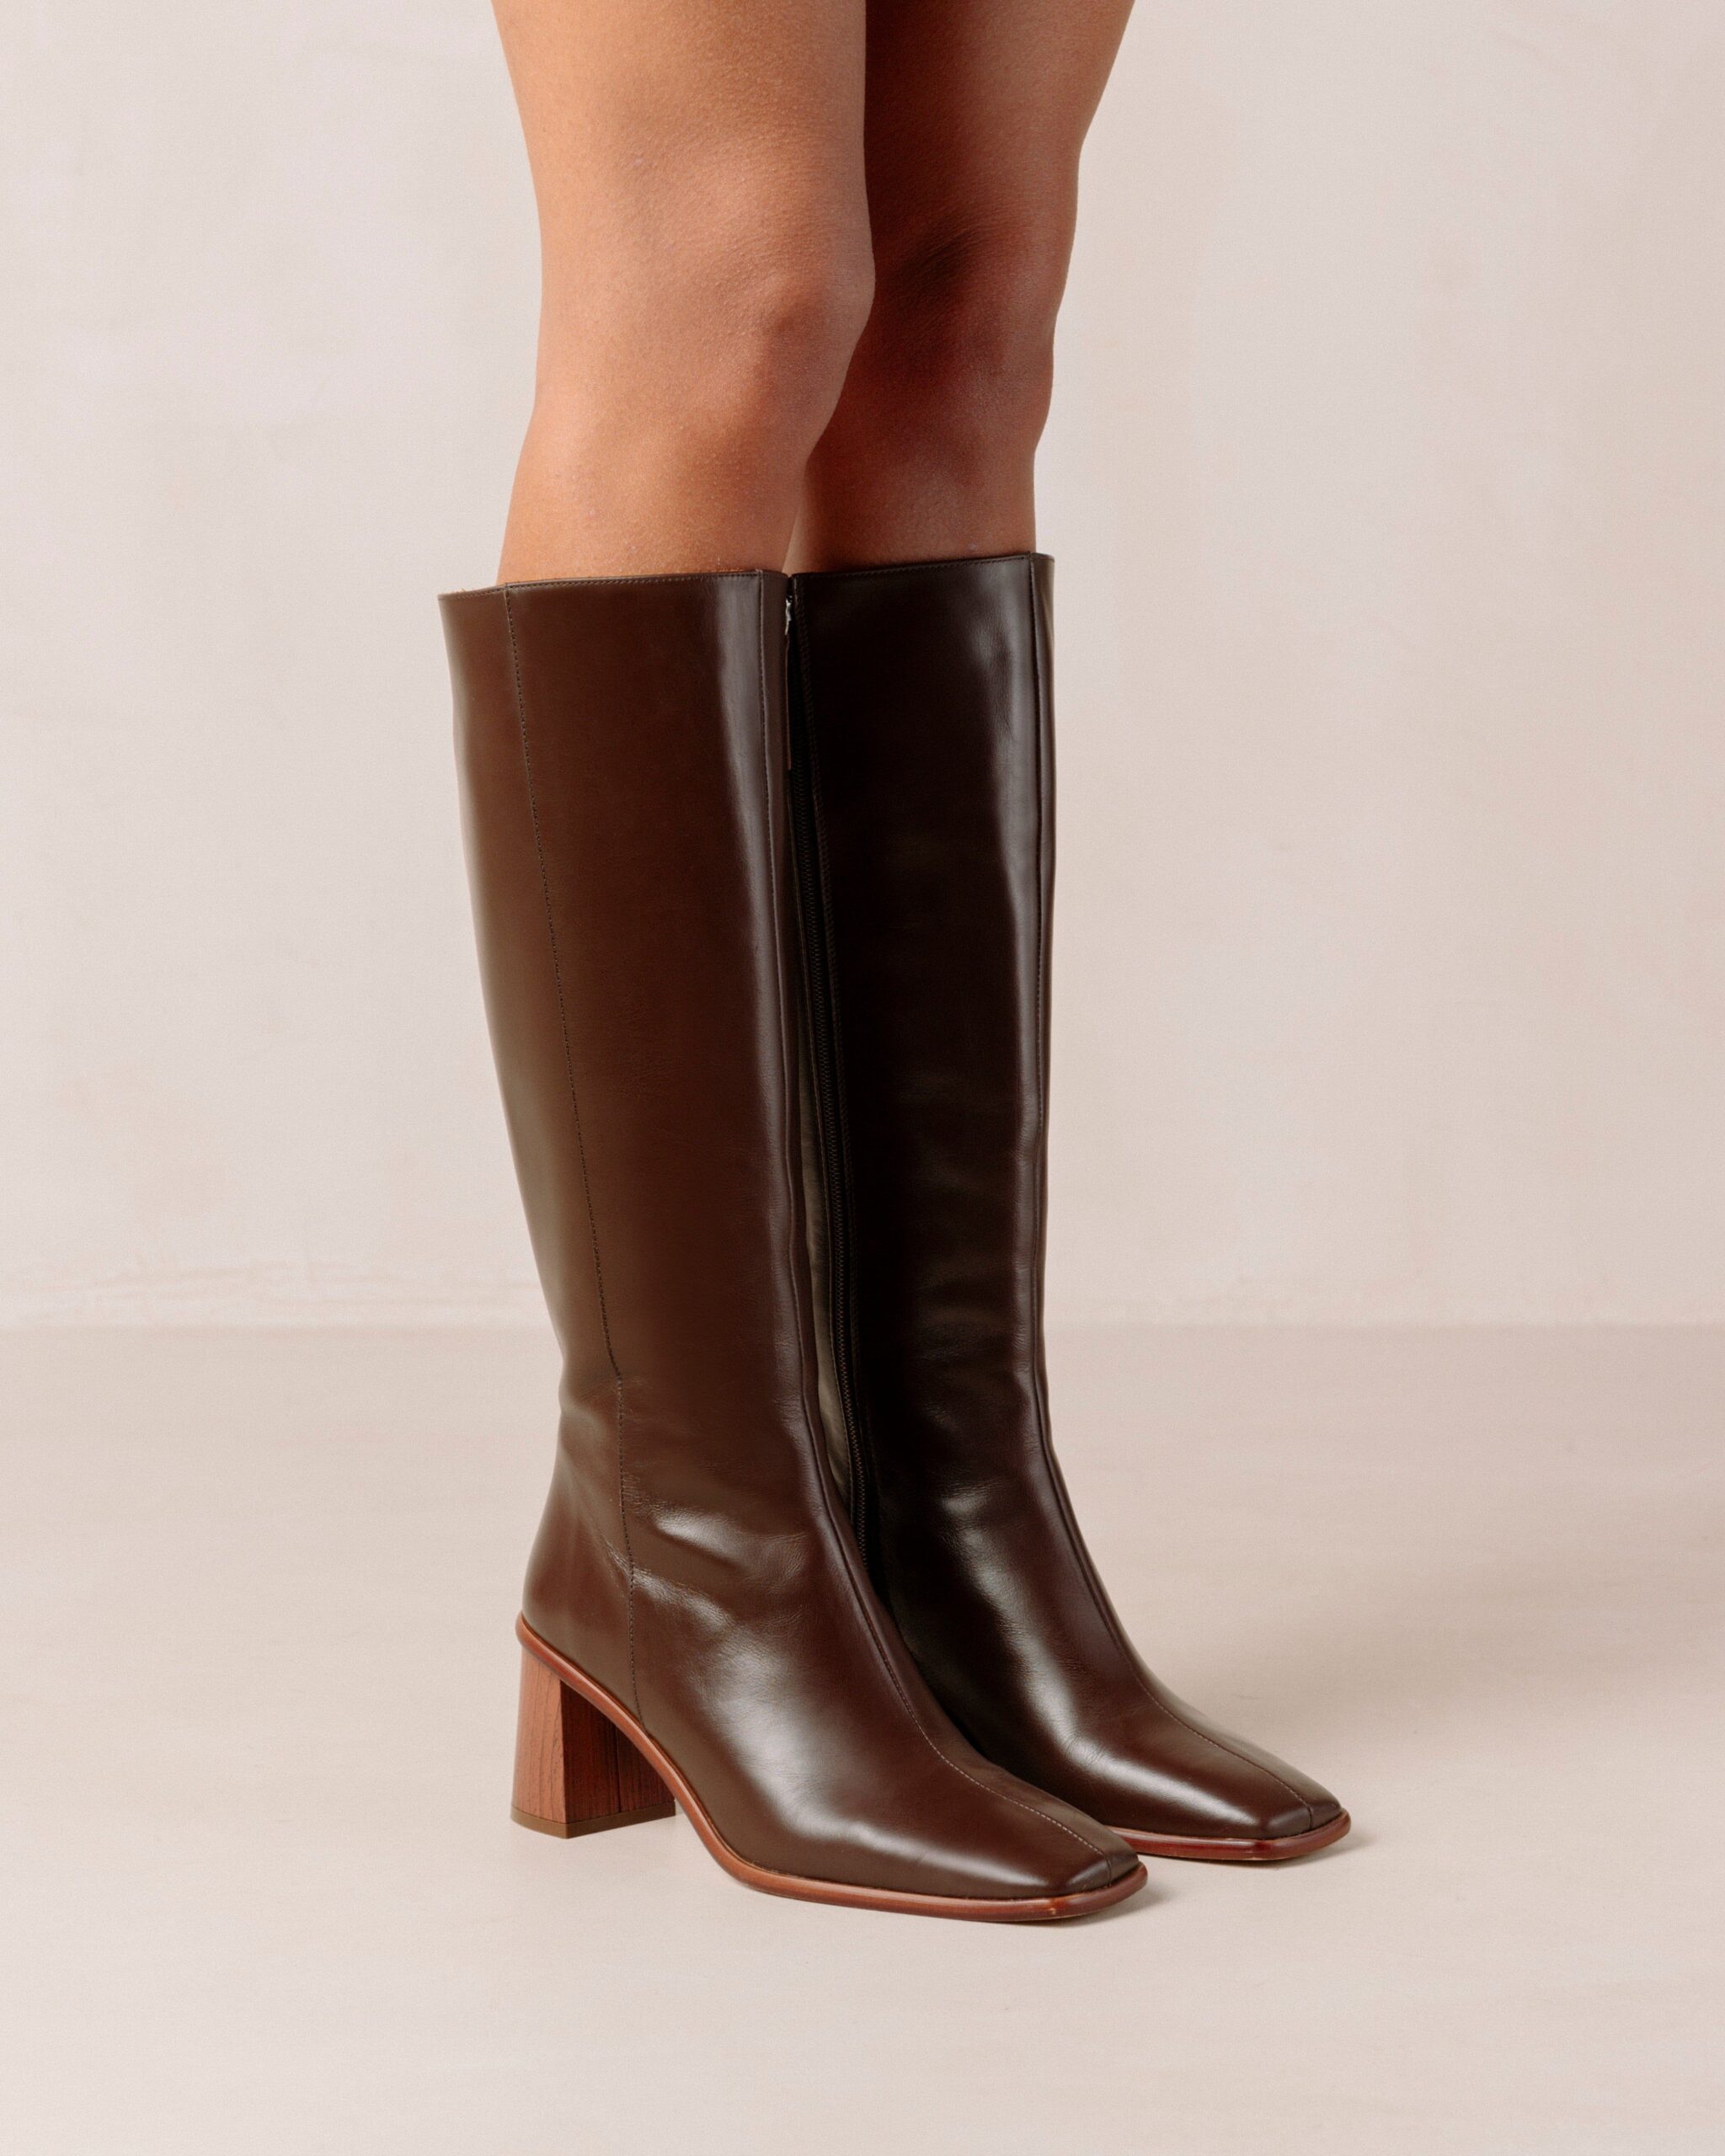 Finding the Perfect Pair: A Guide to
Brown Riding Boots